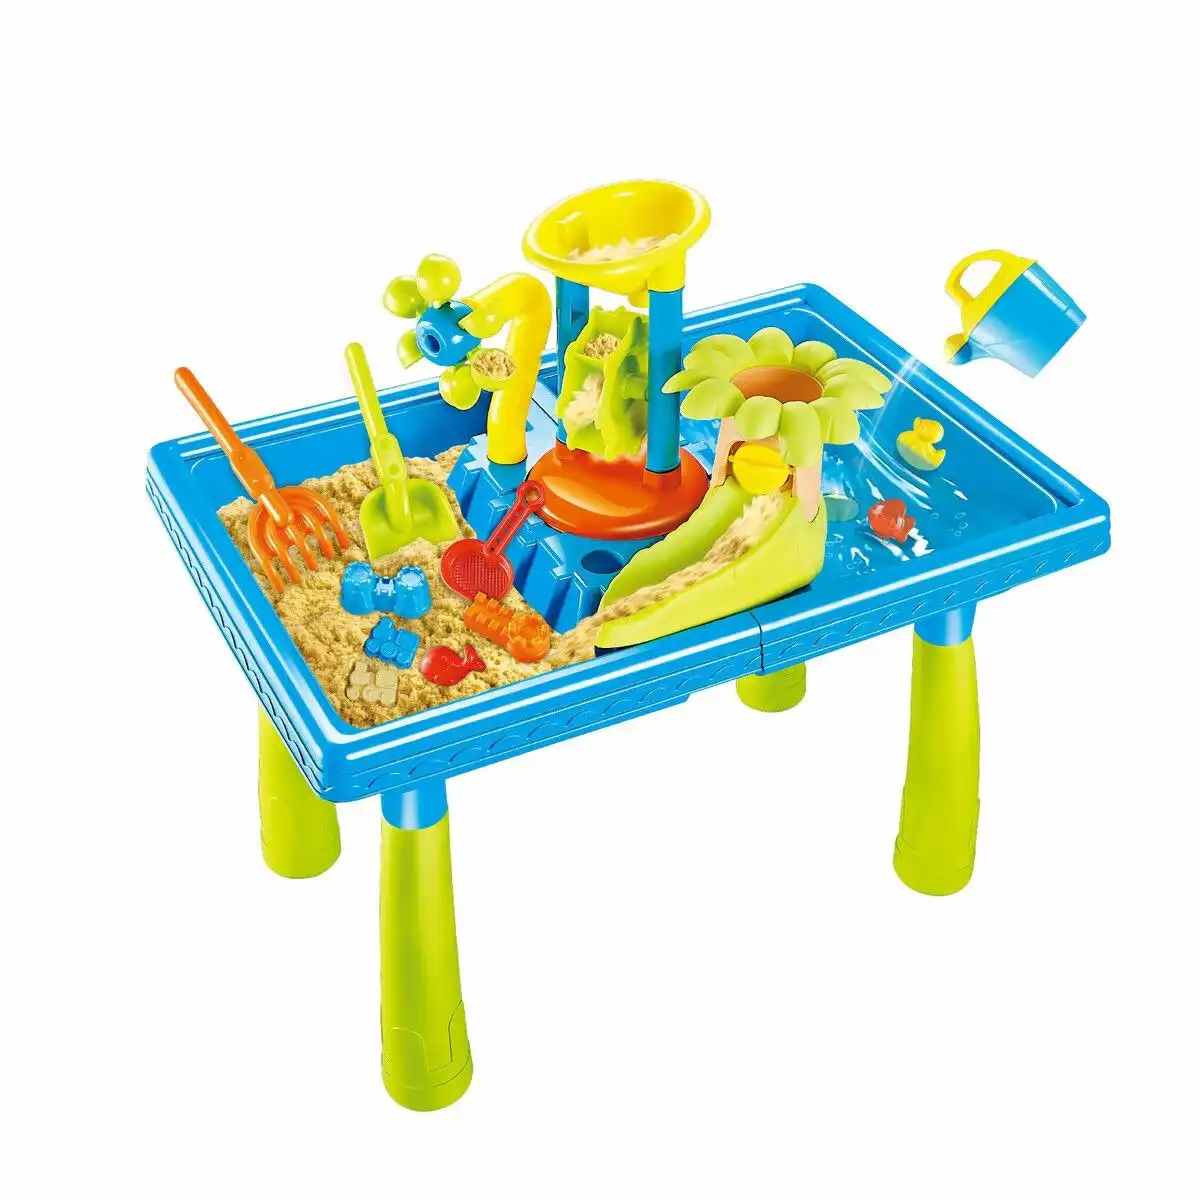 Ausway 2in1 Water Sand Table Kid Sandpit Beach Play Swimming Pool Toys Outdoor Activity Pretend Set